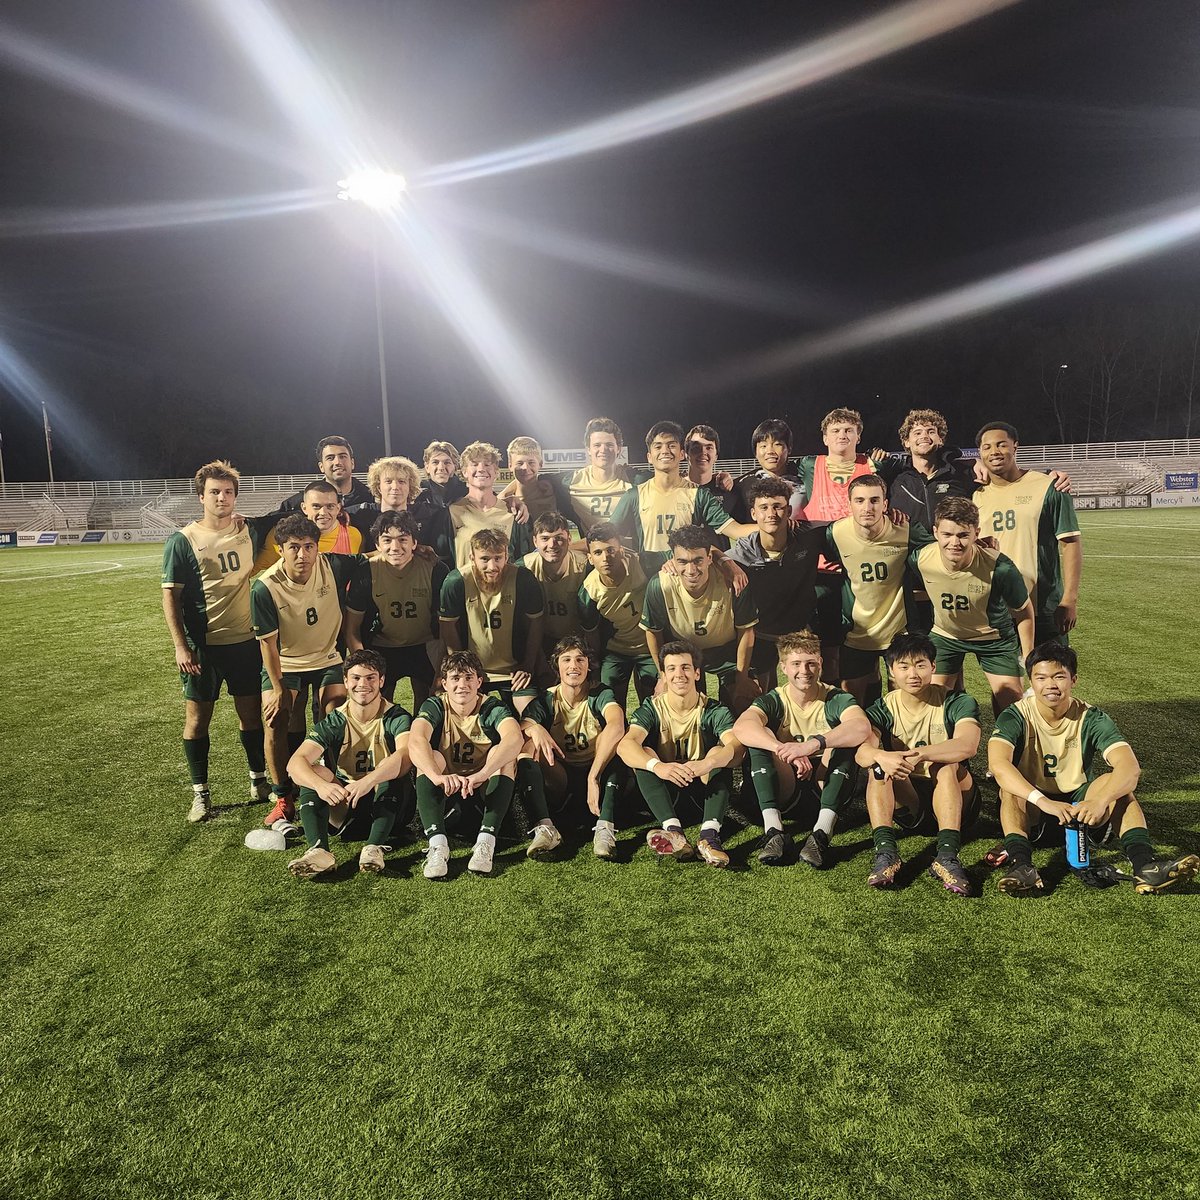 Great team effort tonight.  What I enjoyed most was seeing the guys trusting each other for 90 minutes and applying items worked on at practice and executing them in the game.  Good 3-1 Win to open up Spring on to next one. #minerpride #itsaWEthing